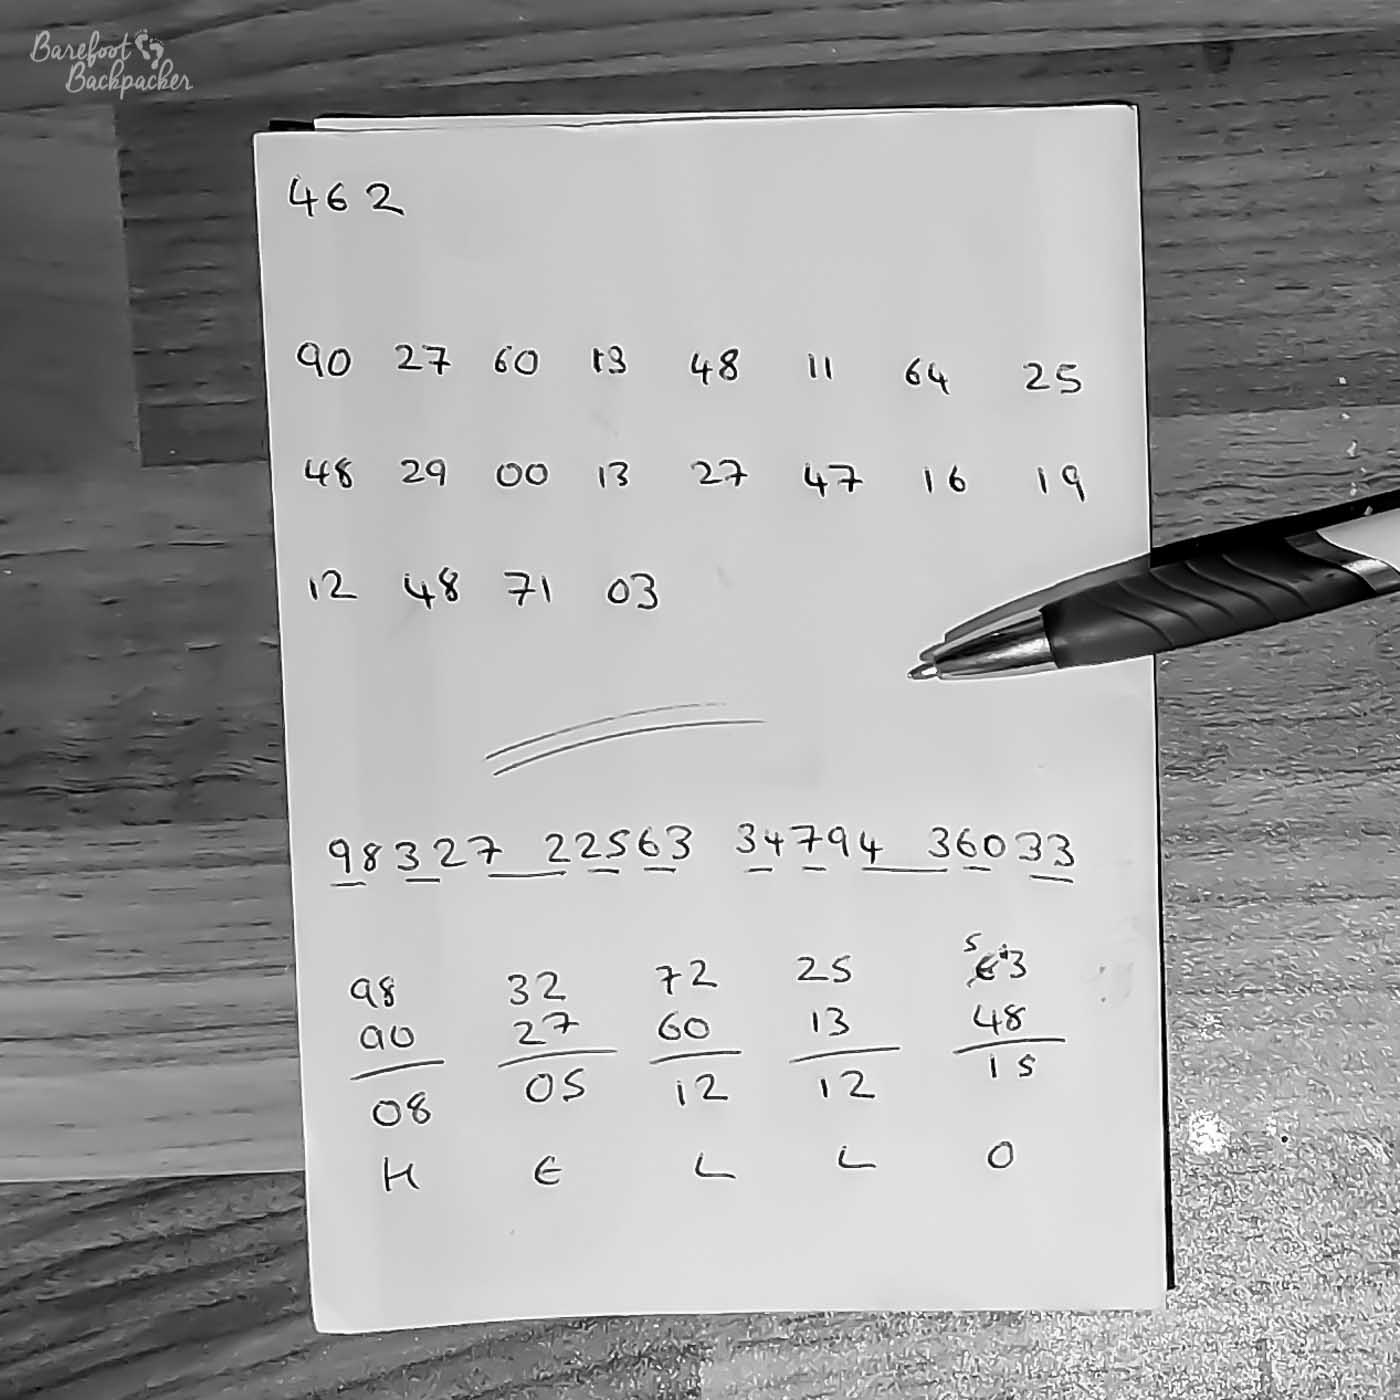 Image of a sheet of paper on a table with a summary of the above steps on it – the long key code from step 2 at the top, separated out into two-digit numbers, then below that the message transmitted at step 6, and below that a series of sums calculated in step 7 to produce the word 'hello'.